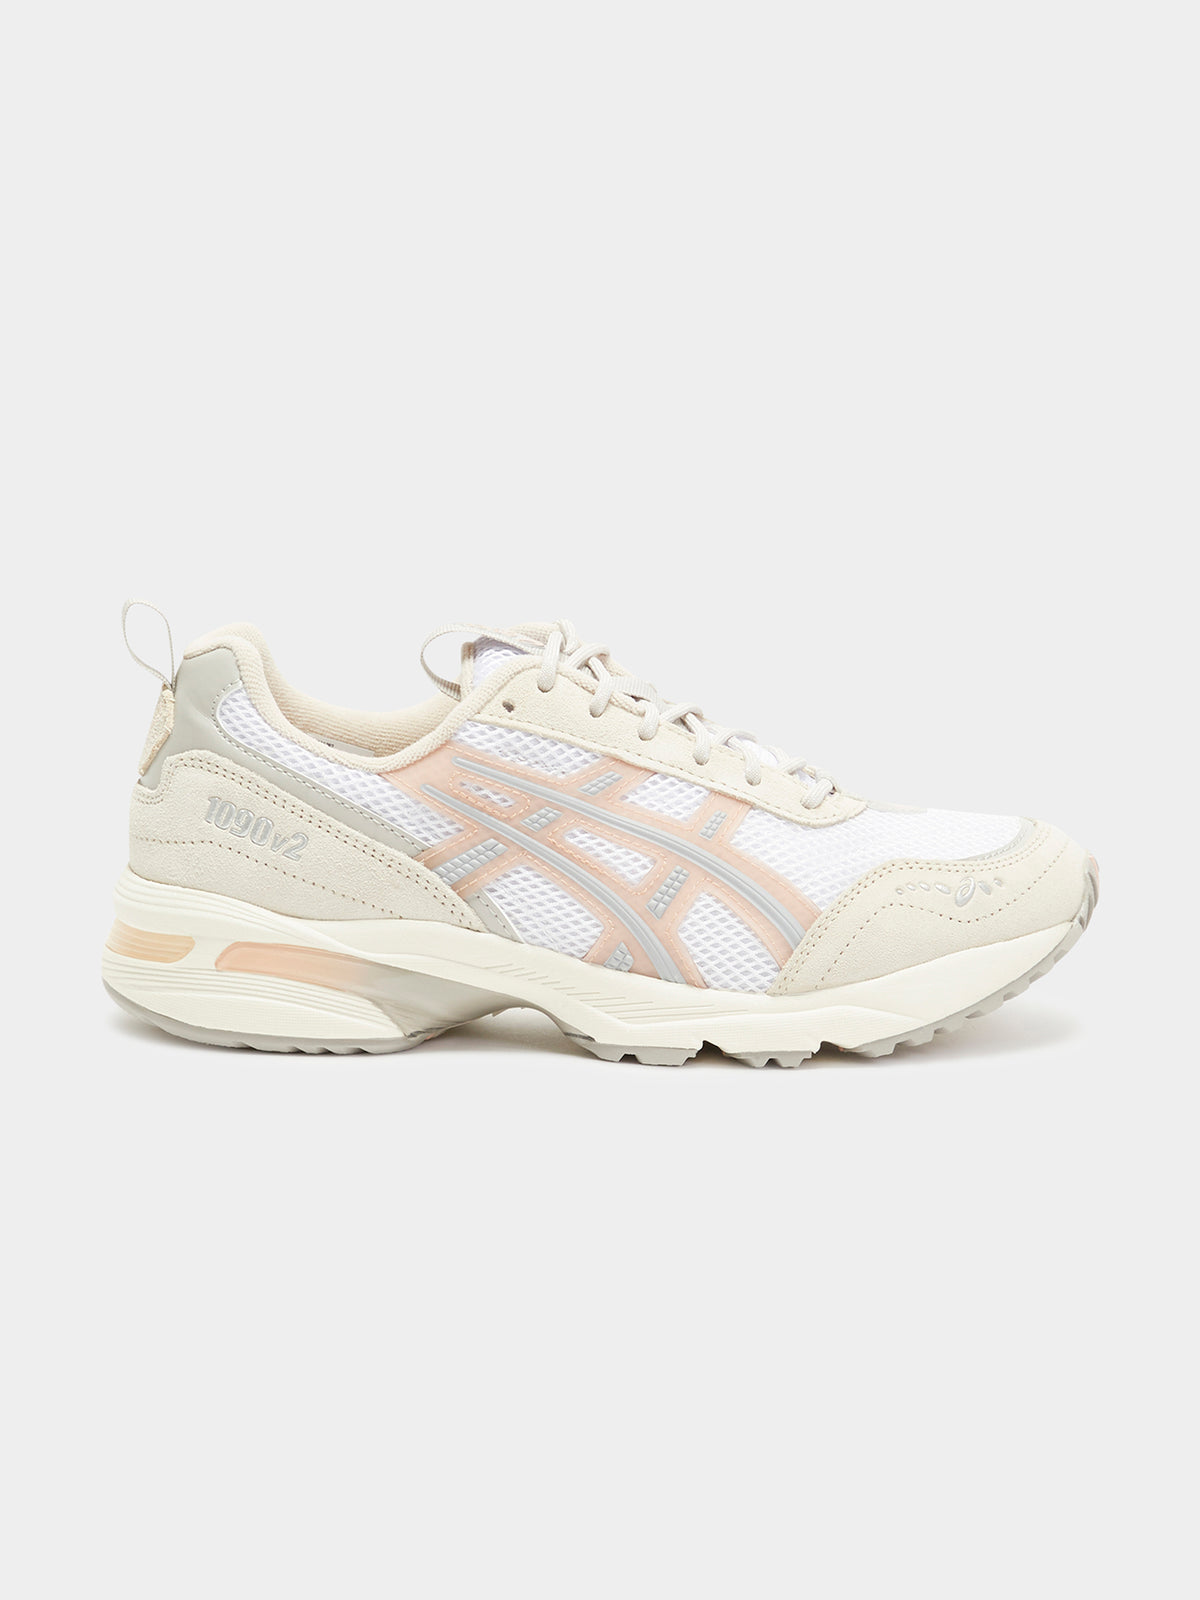 Womens Gel-1090 V2 Sneakers in White &amp; Pink